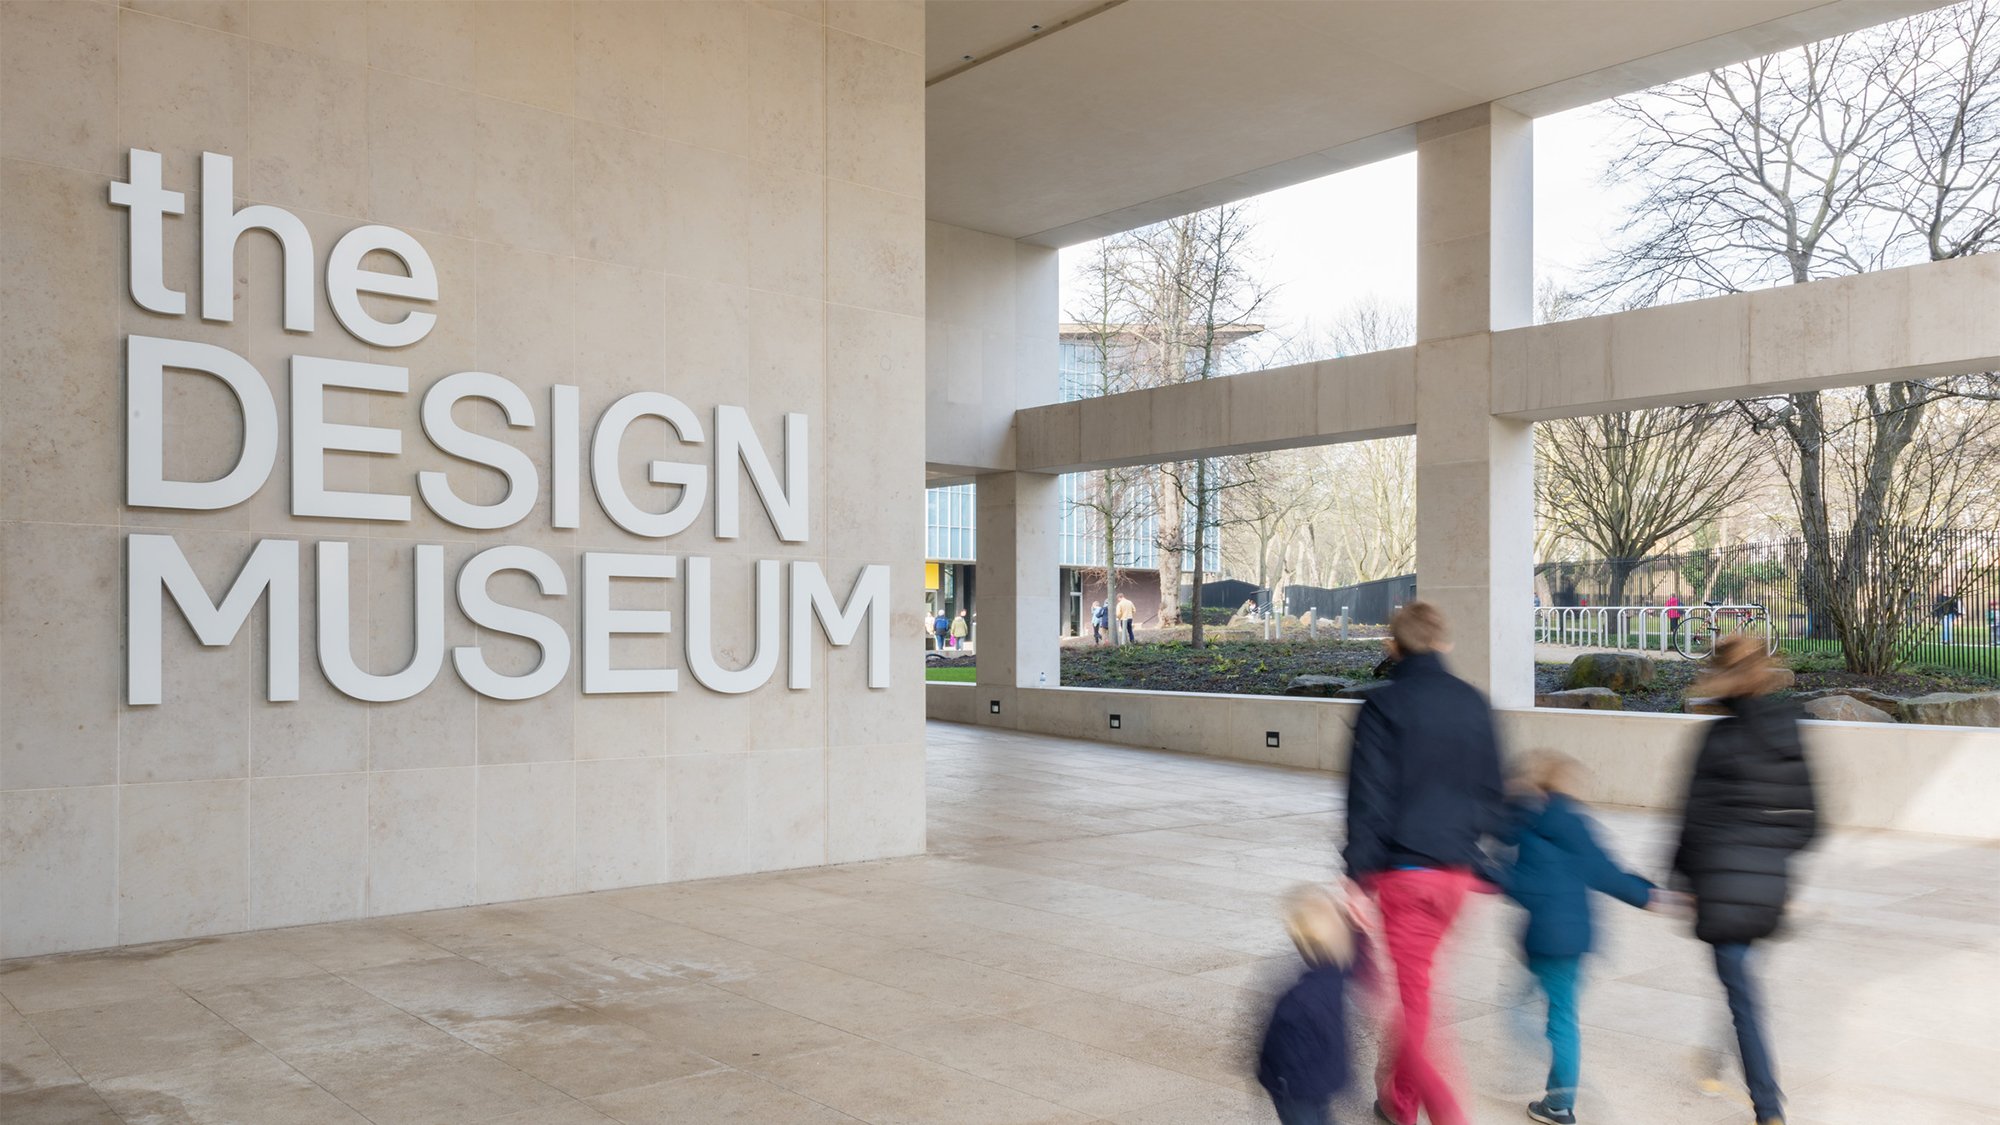 The Design Museum opened to the public in November 2016. Photo credit: Paul Carstairs